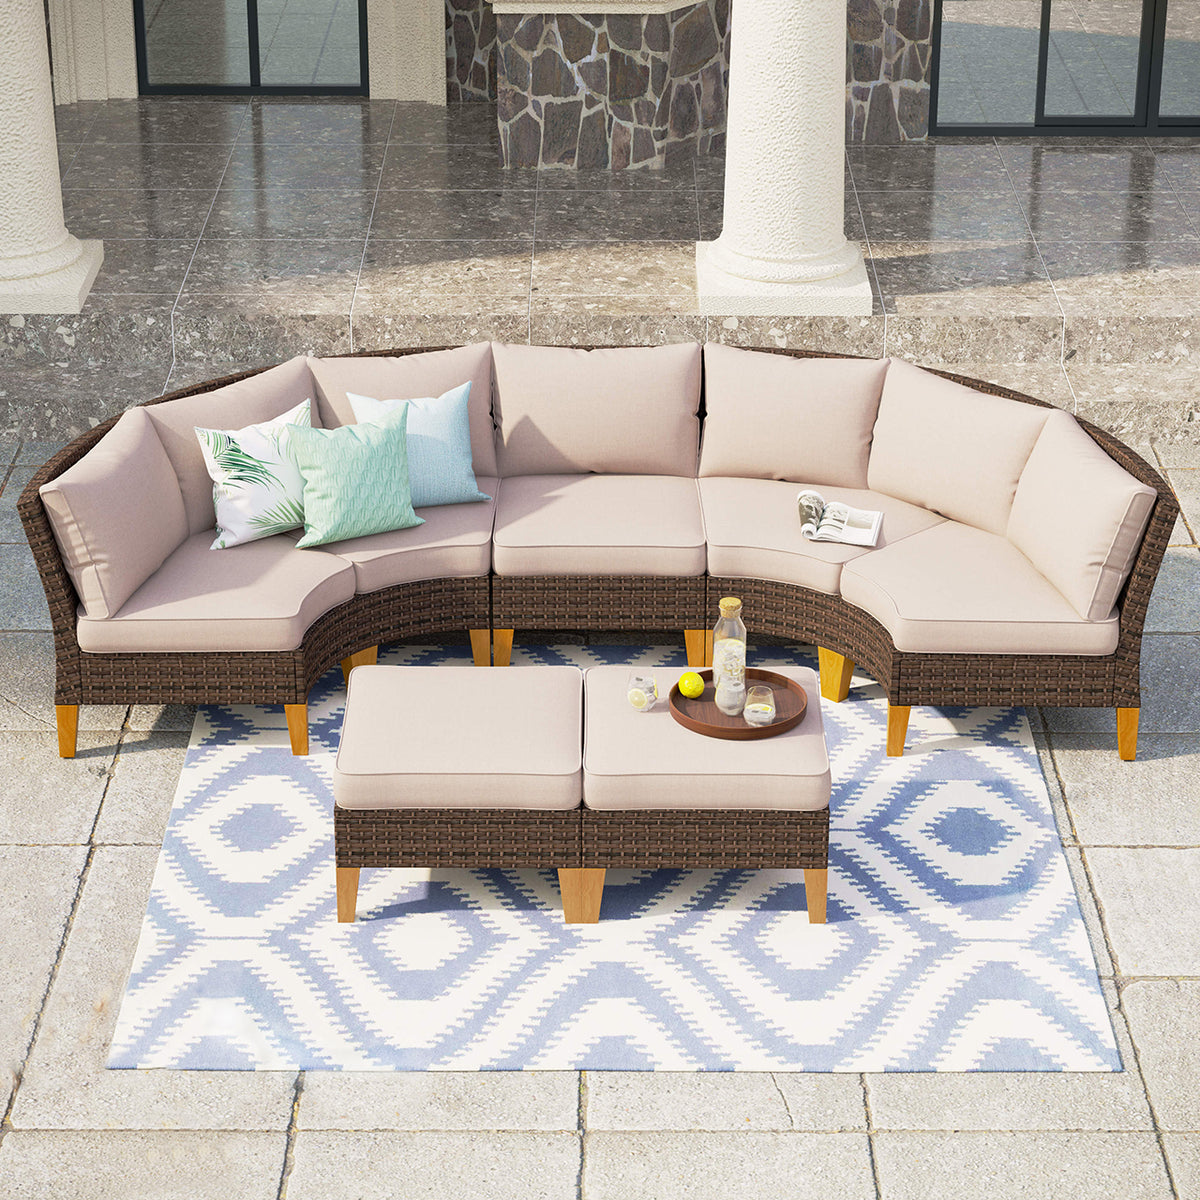 7-seat modular sofa for outdoor space with modern design